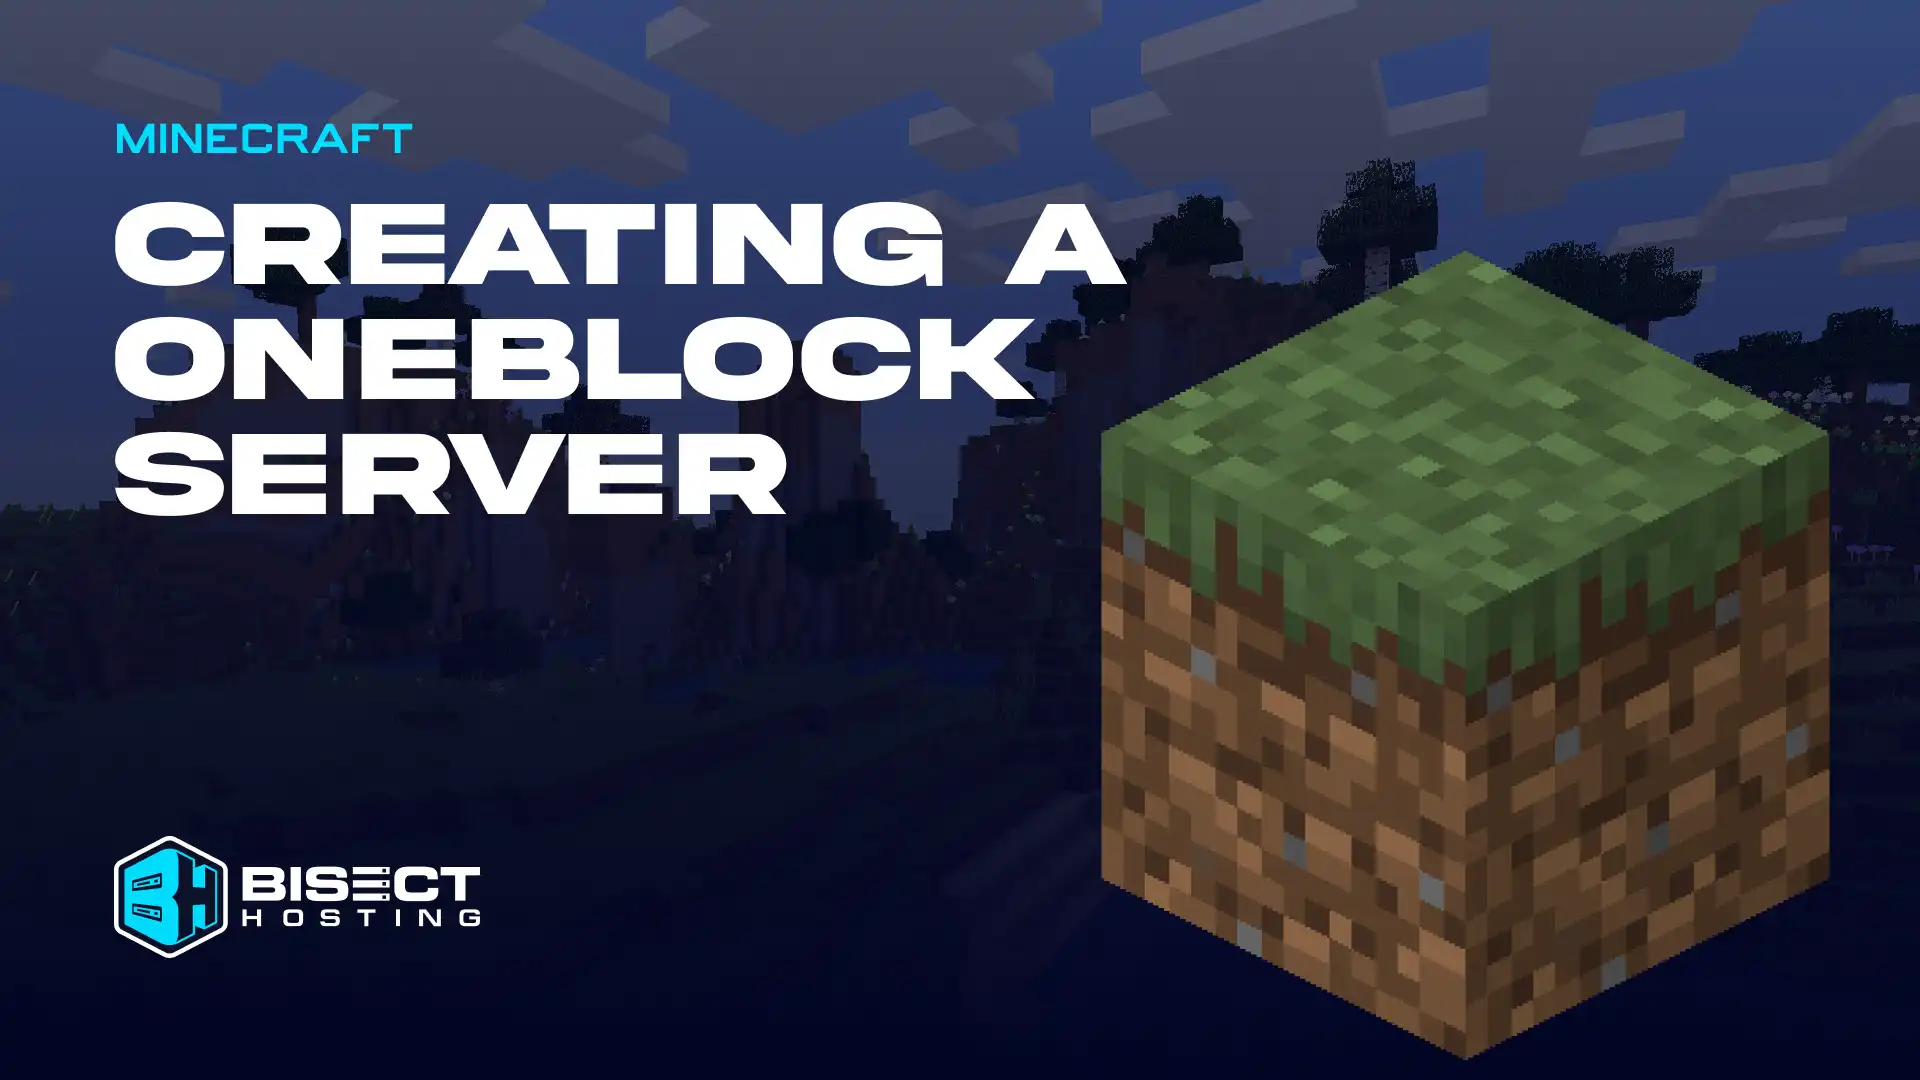 How to Create a OneBlock Server in Minecraft